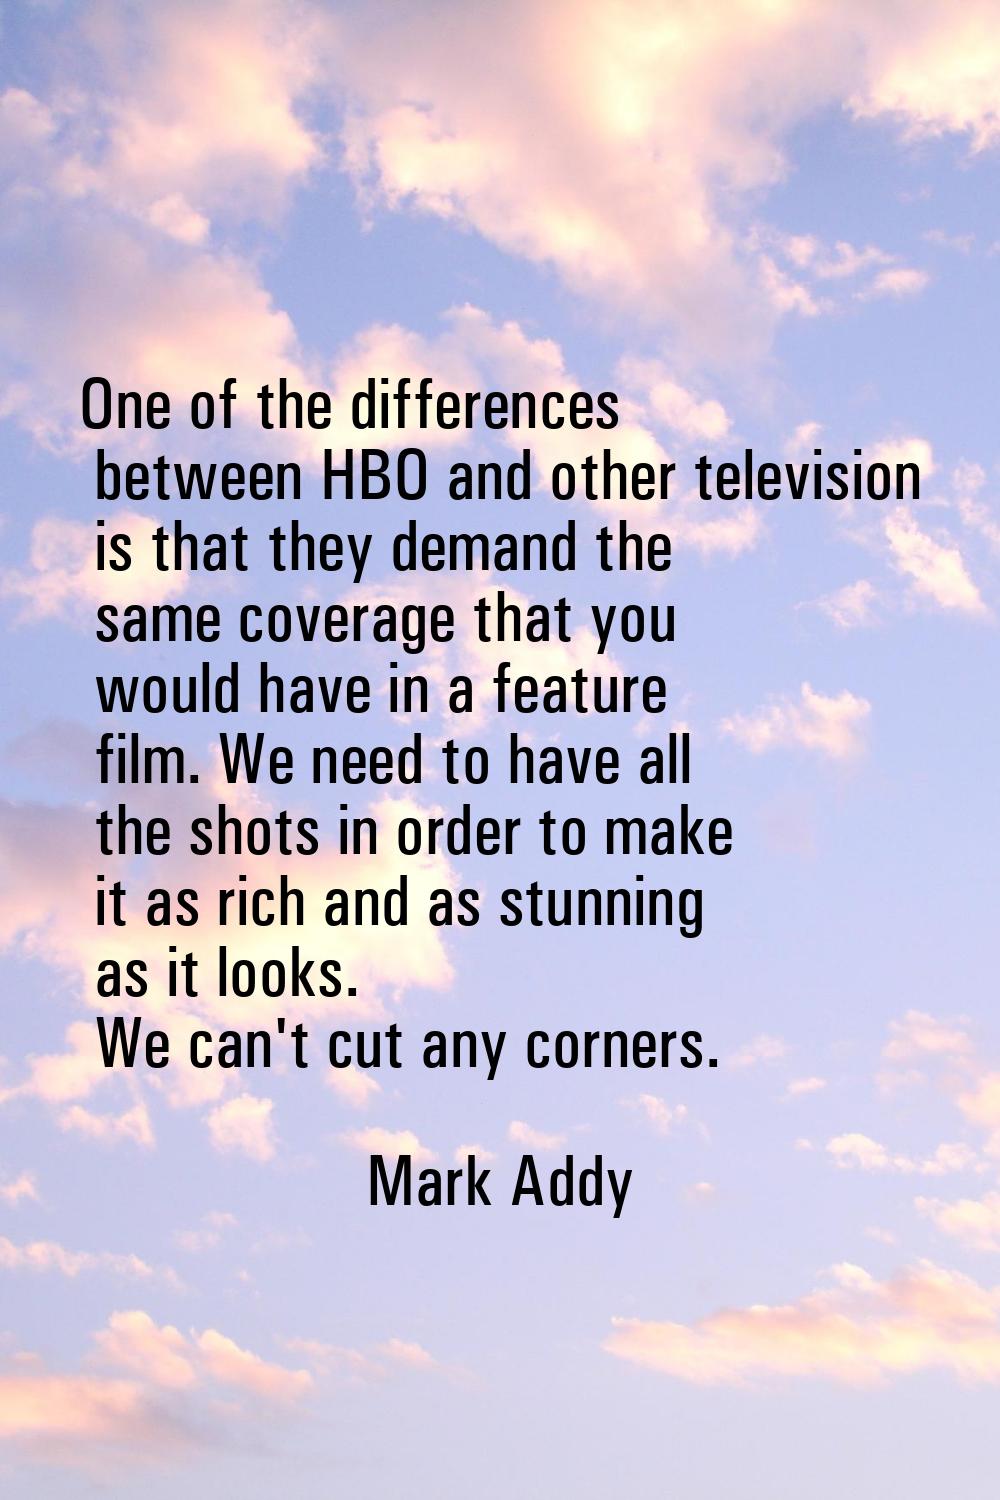 One of the differences between HBO and other television is that they demand the same coverage that 